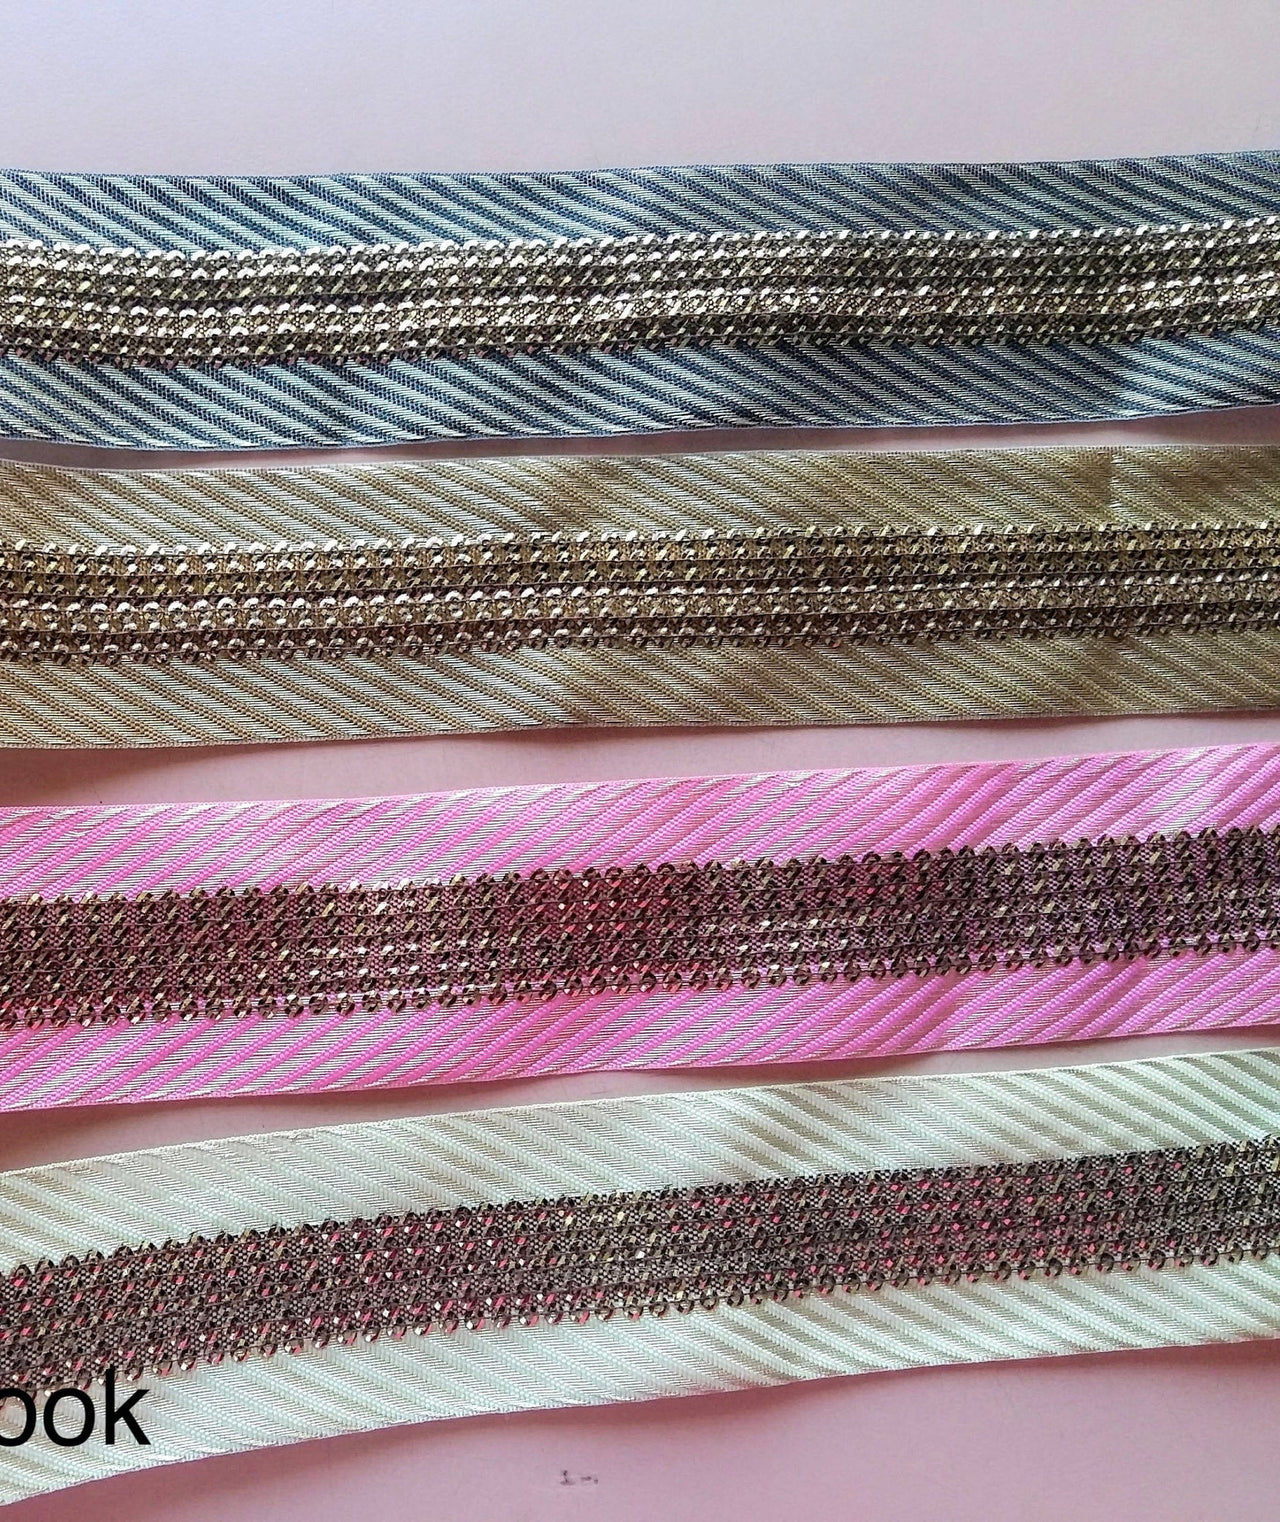 Indian Lace Trim Stripes Embroidered Lace Trim 38mm Wide, Trimming, Decorative Ribbon